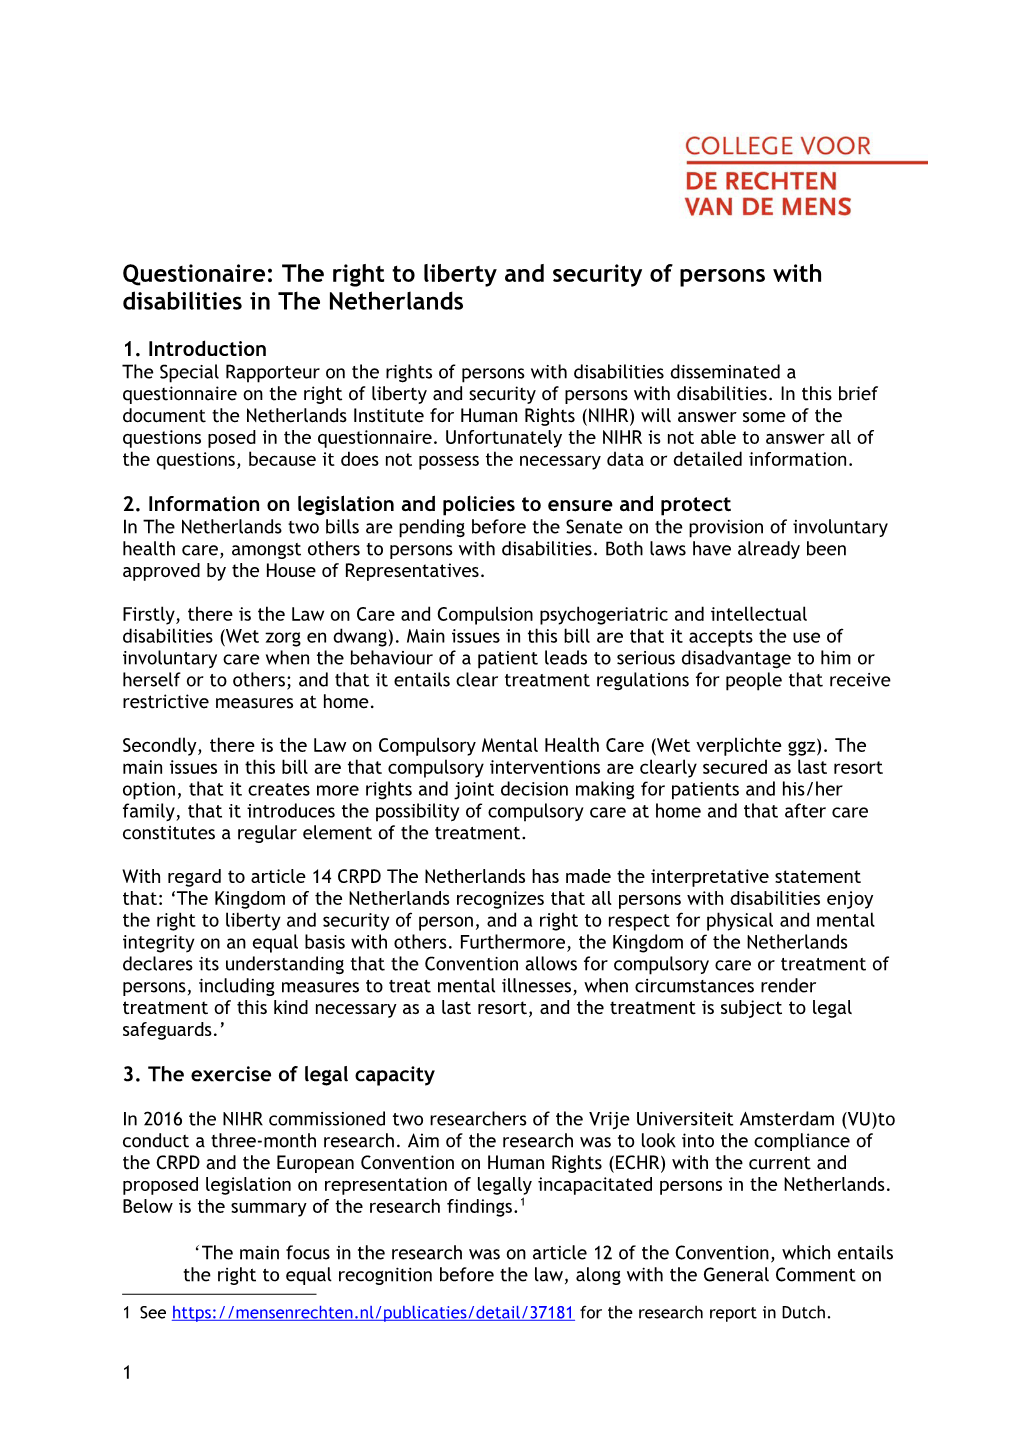 Questionaire: the Right to Liberty and Security of Persons with Disabilities in the Netherlands